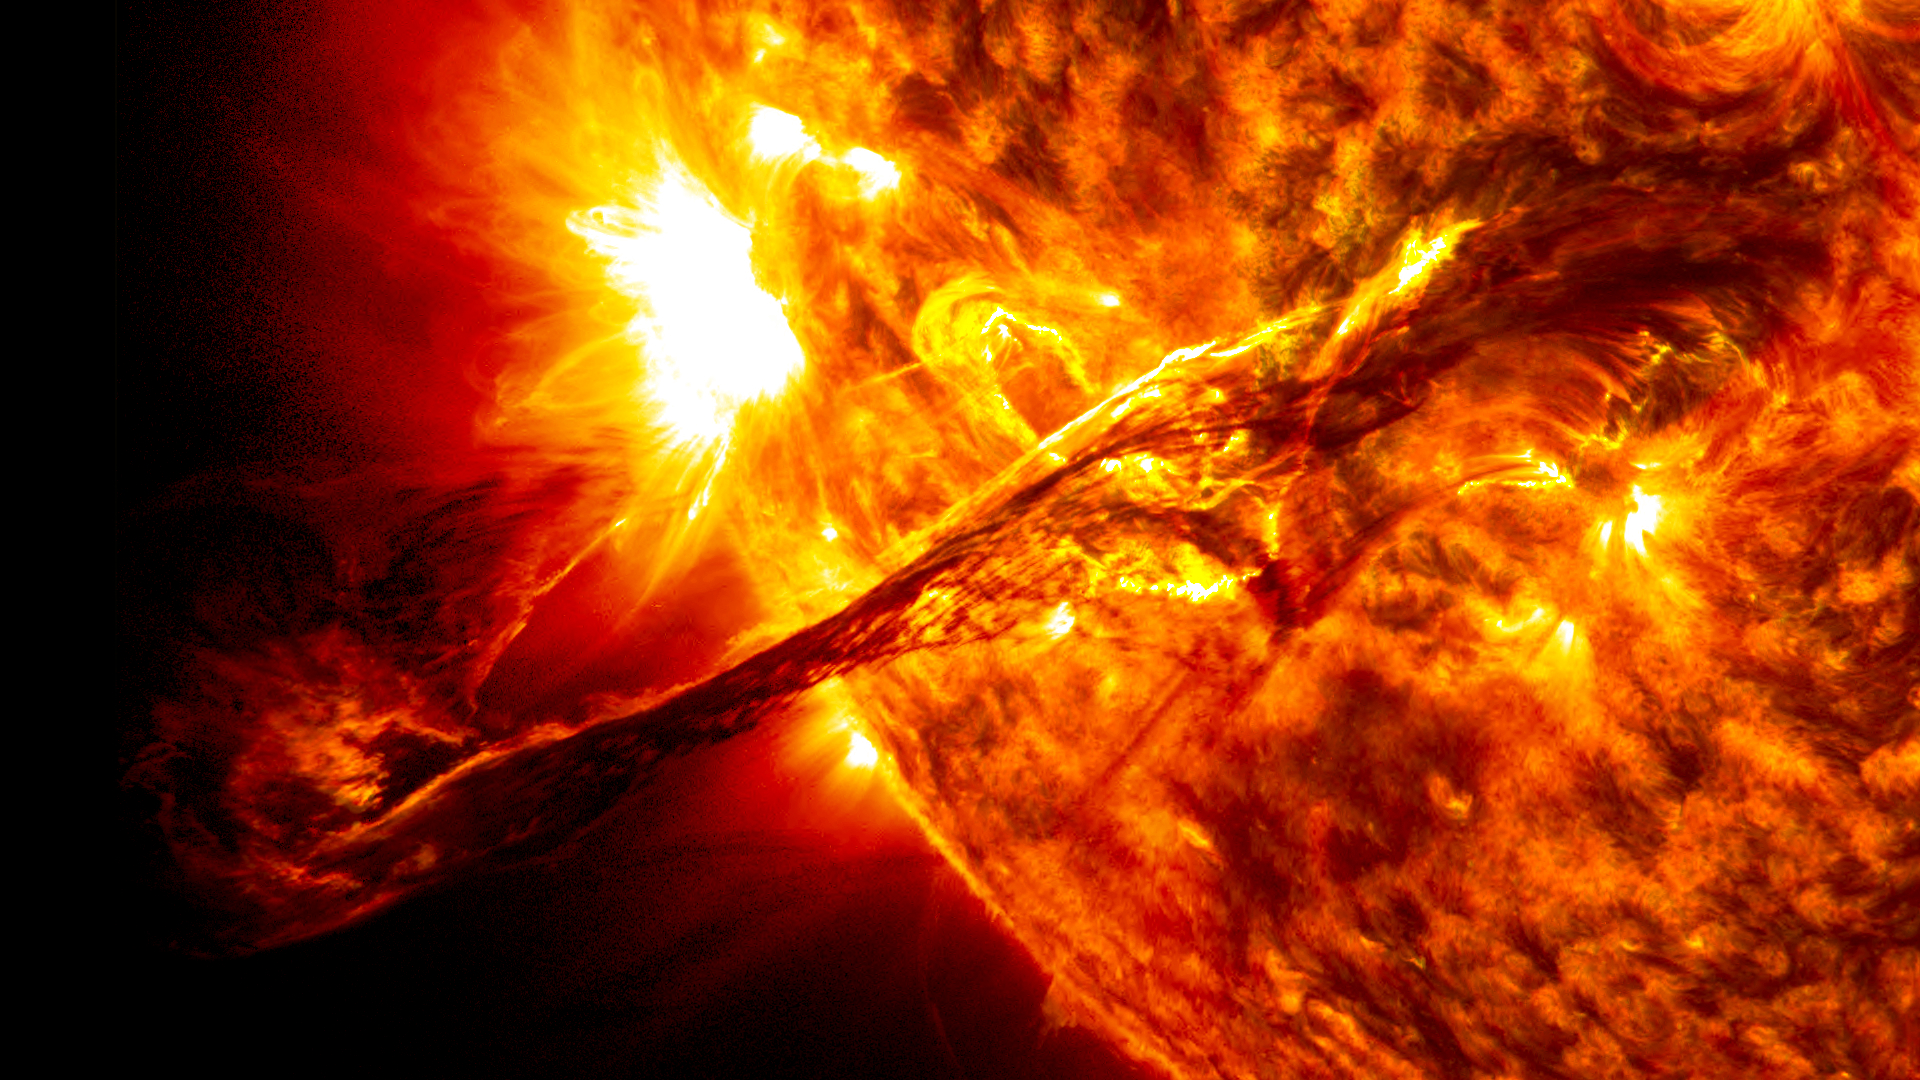 A number of NASA instruments captured detailed images of this coronal mass ejection on August 31, 2012. Although CMEs can damage sensitive technological systems, this one just struck a glancing blow to Earth's atmosphere. New research has identified quasi-annual variations in solar activity, which may help experts better forecast CMEs and potentially damaging space weathers. (Image courtesy NASA Goddard Space Flight Center.)